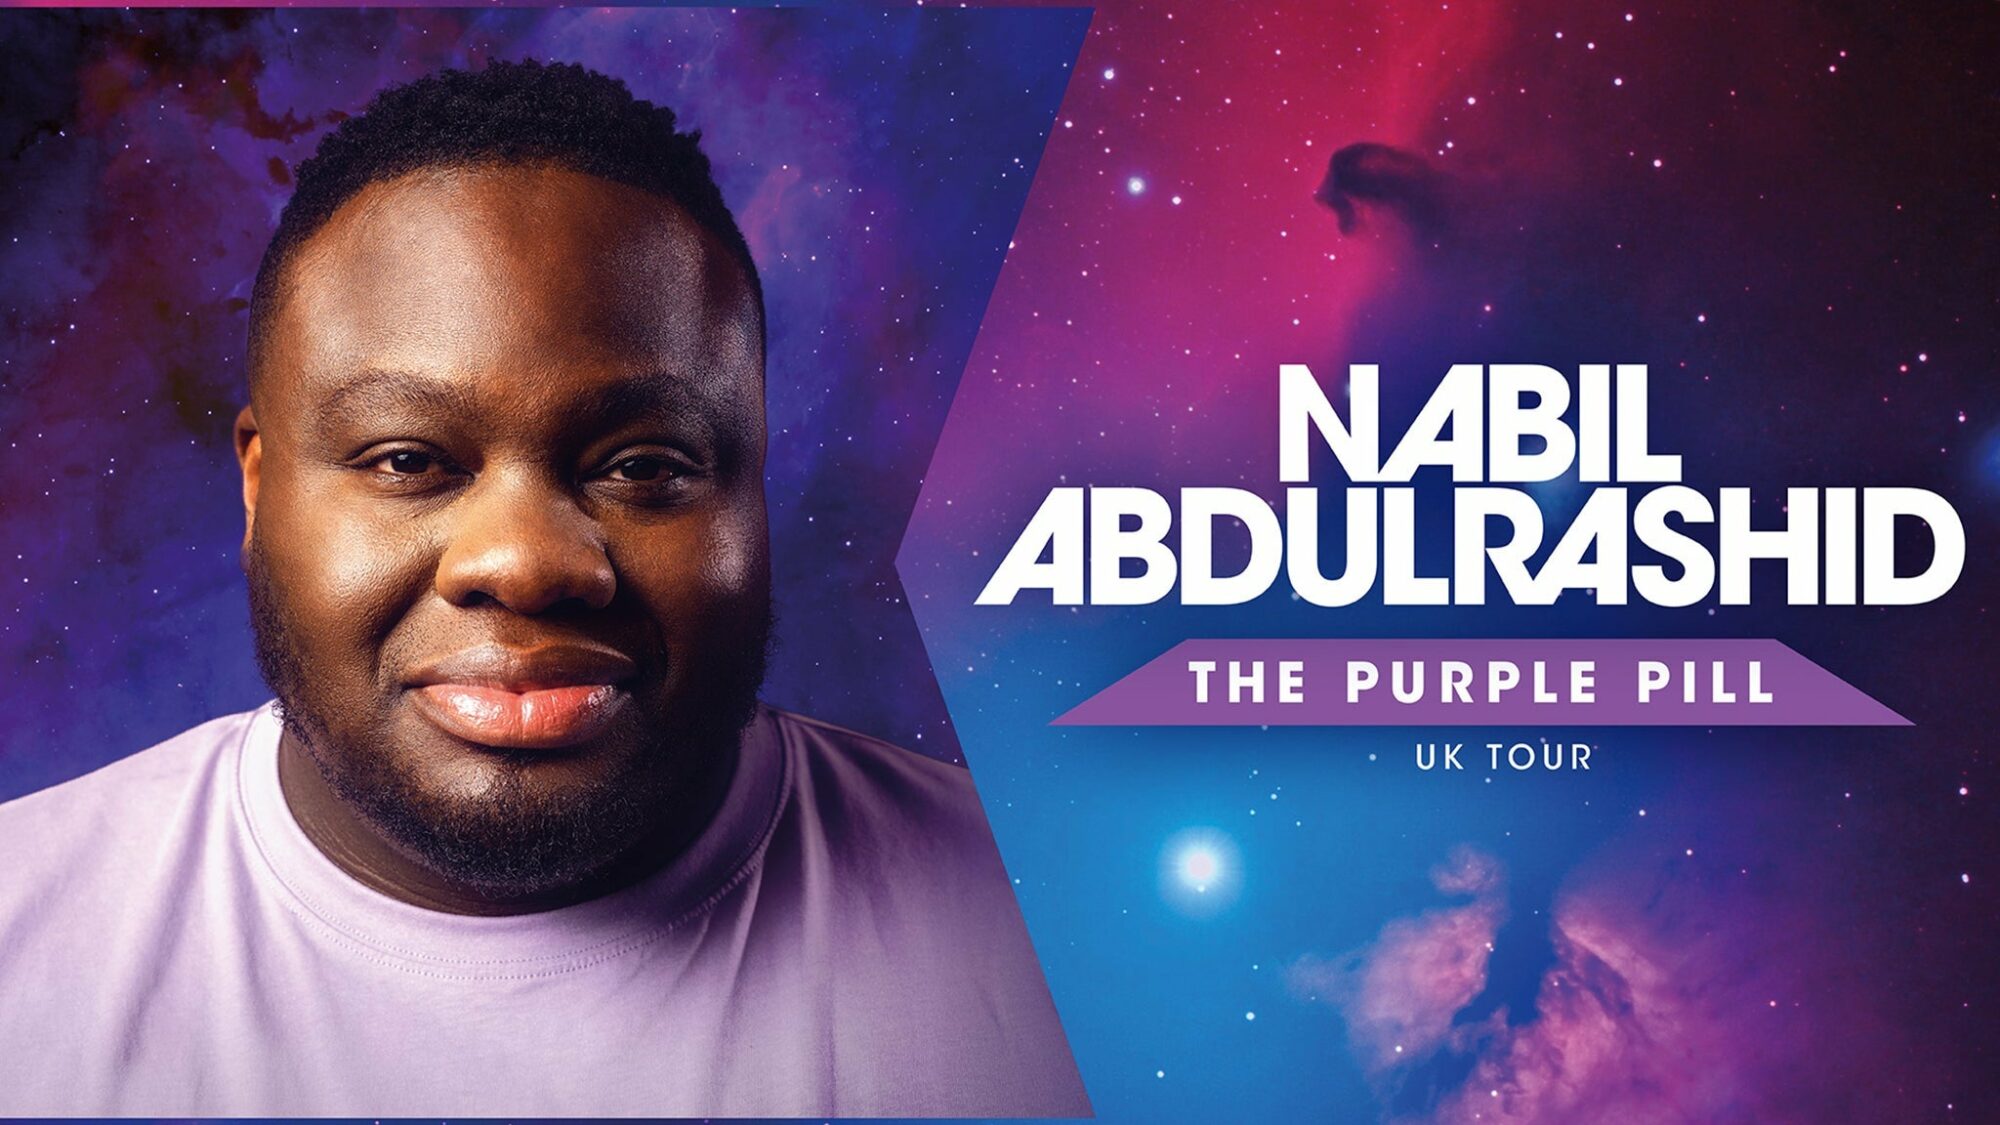 Image name Nabil Abdulrashid the Purple Pill at THE STUDIO BRADFORD Yorkshire the 25 image from the post Nabil Abdulrashid - the Purple Pill at Leadmill, Sheffield in Yorkshire.com.